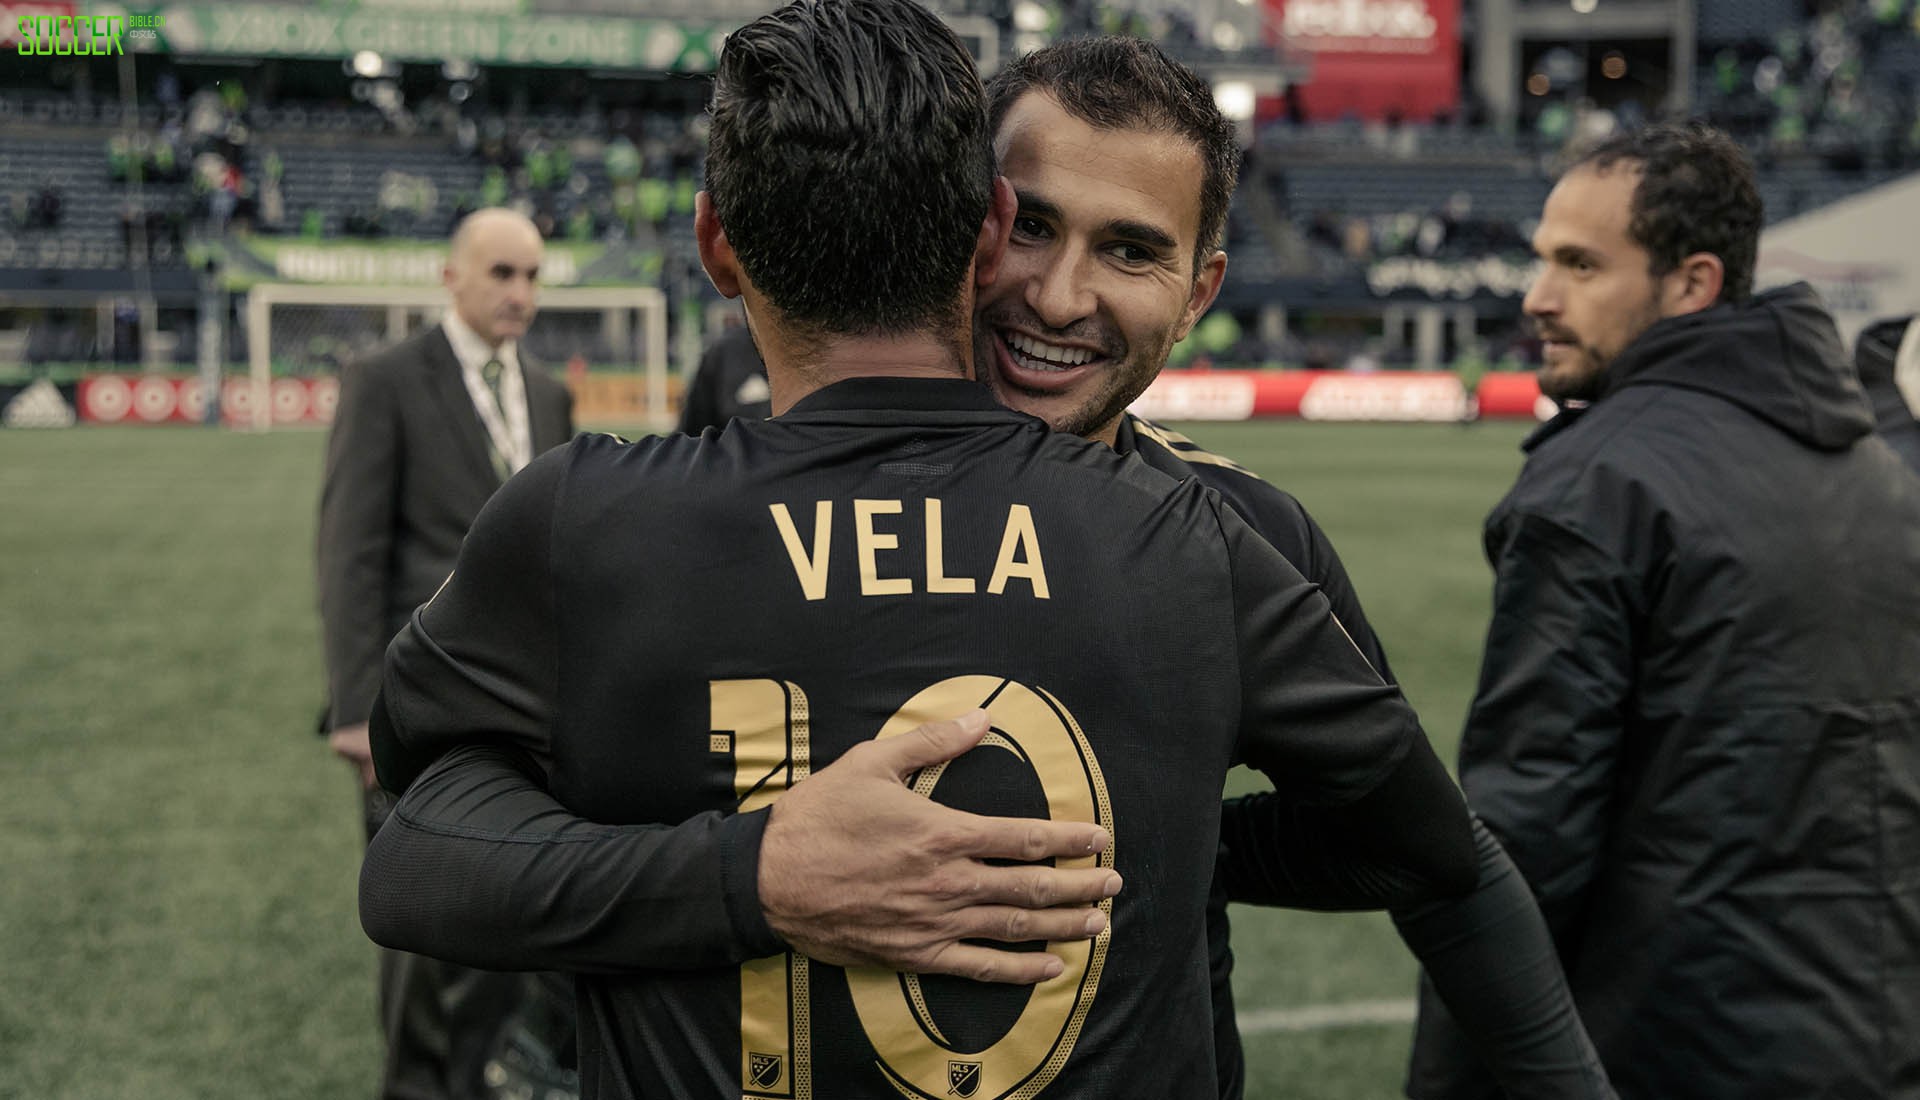 lafc-first-win-soccerbible_0011_2o7a9891